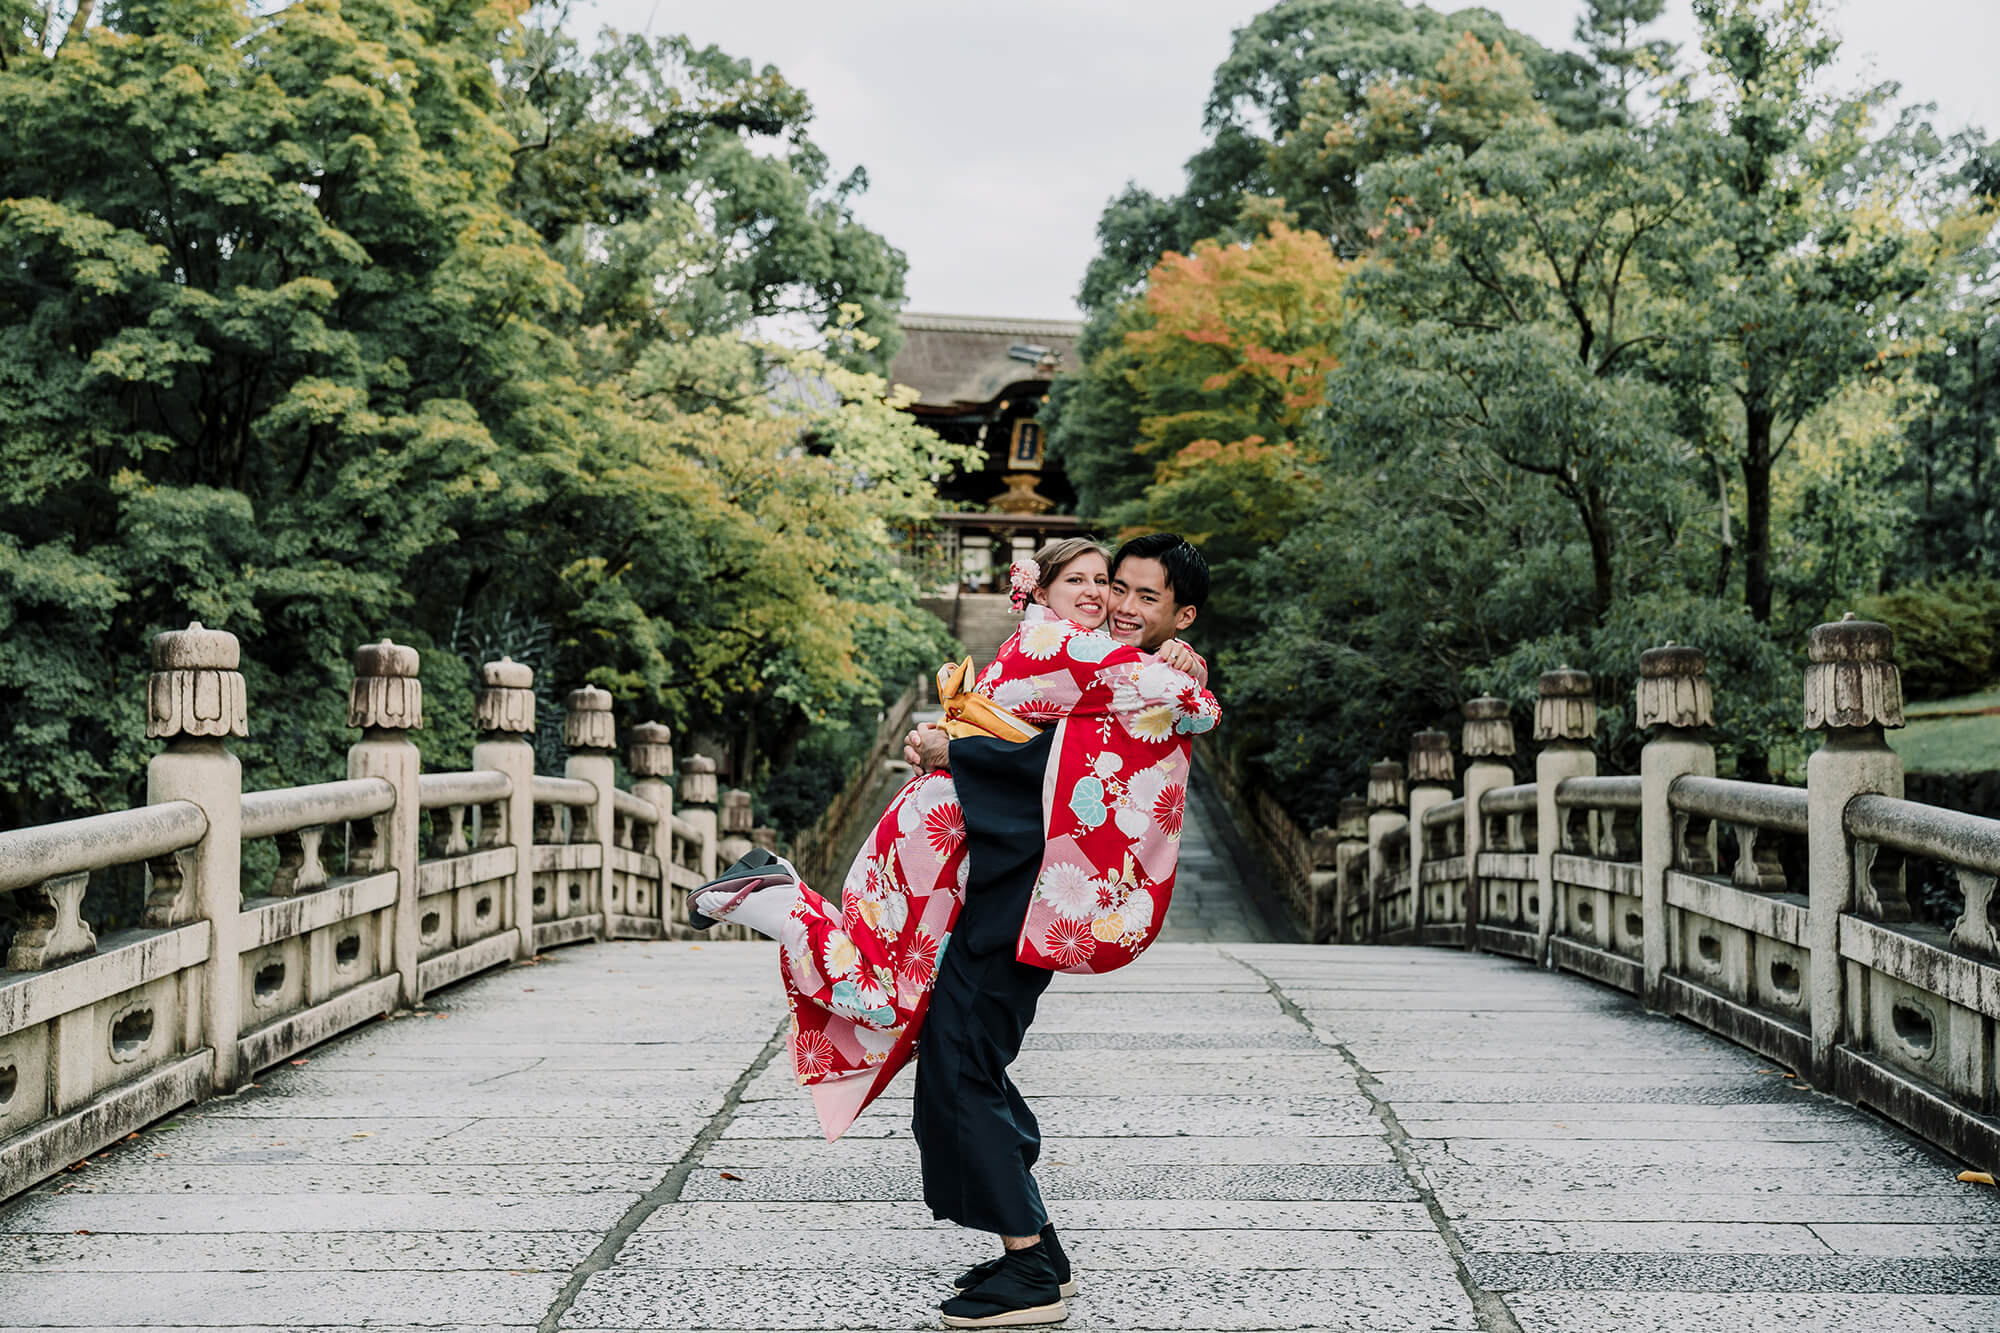 Beautiful shot of the couple in traditional kimono by a Japanese Bridge by Black Avenue Productions